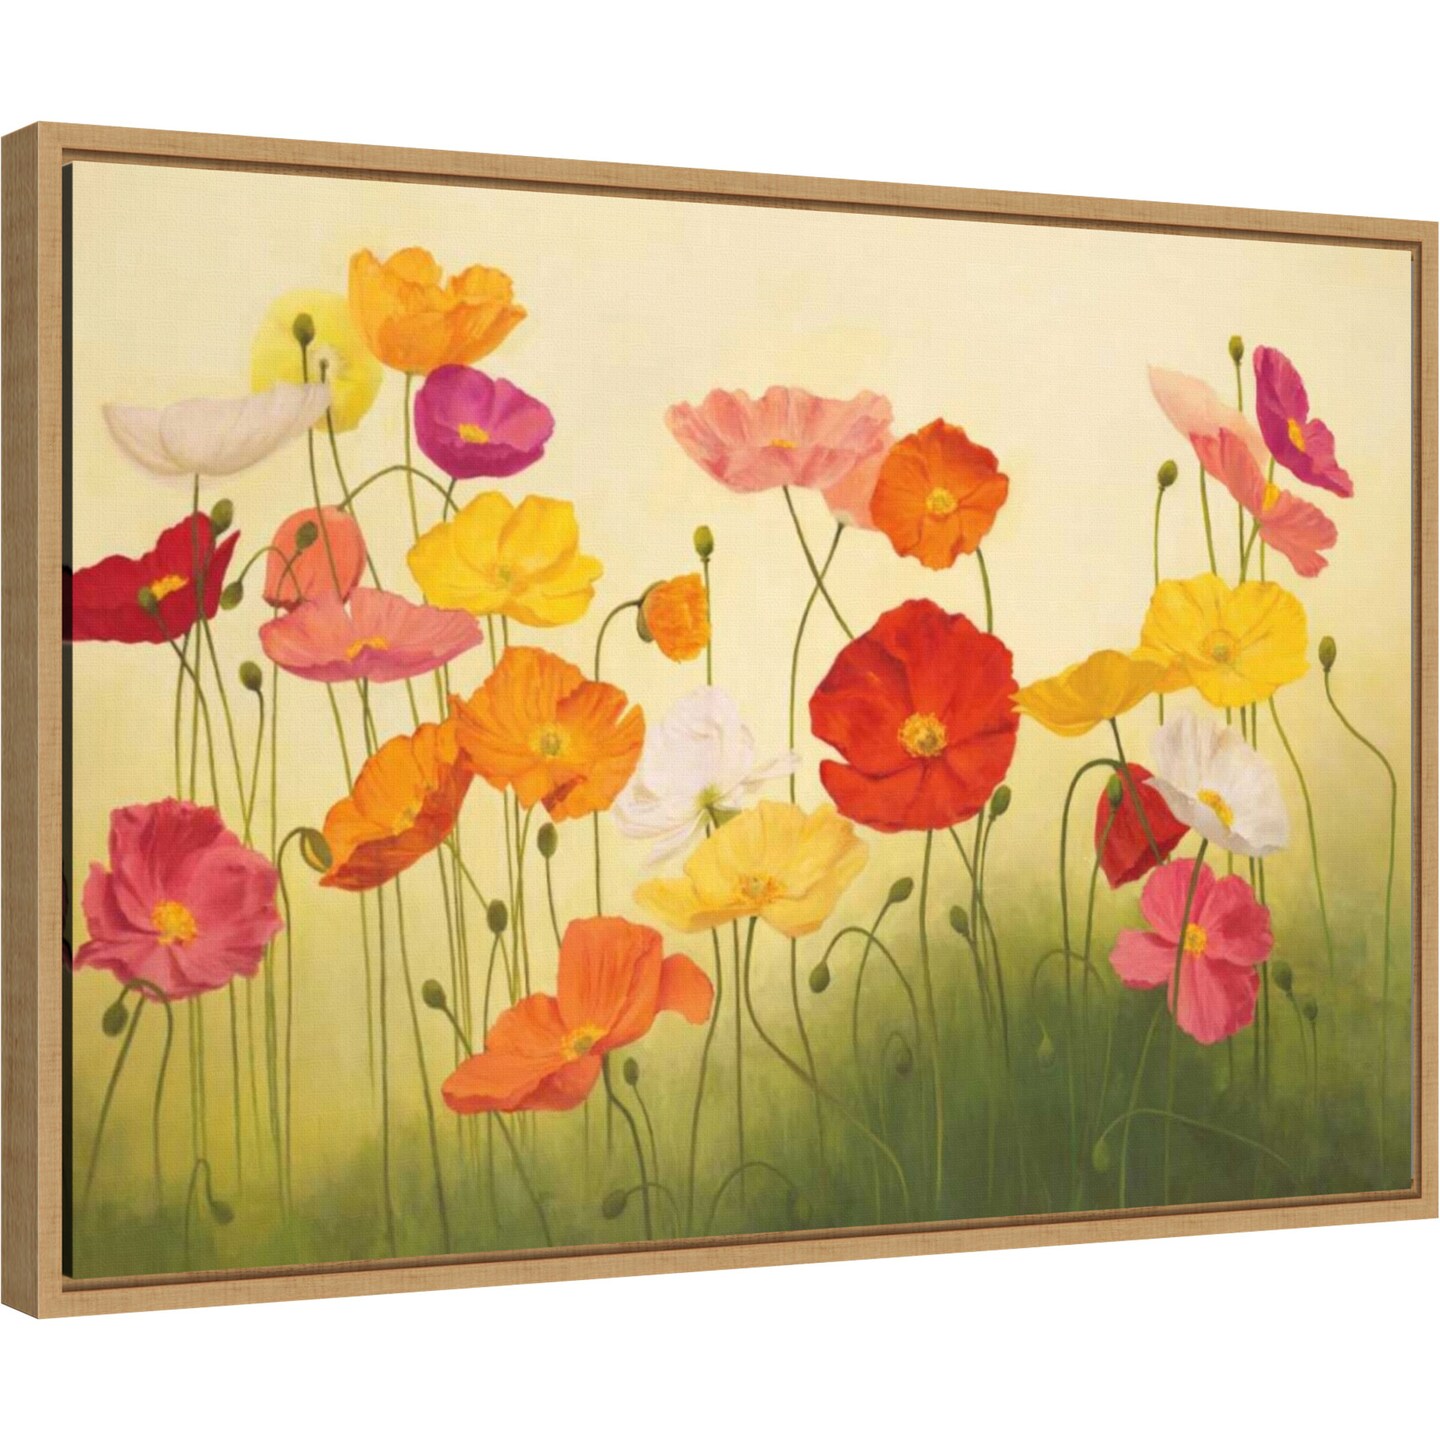 Sunlit Poppies by Janelle Kroner 23-in. W x 16-in. H. Canvas Wall Art Print Framed in Natural